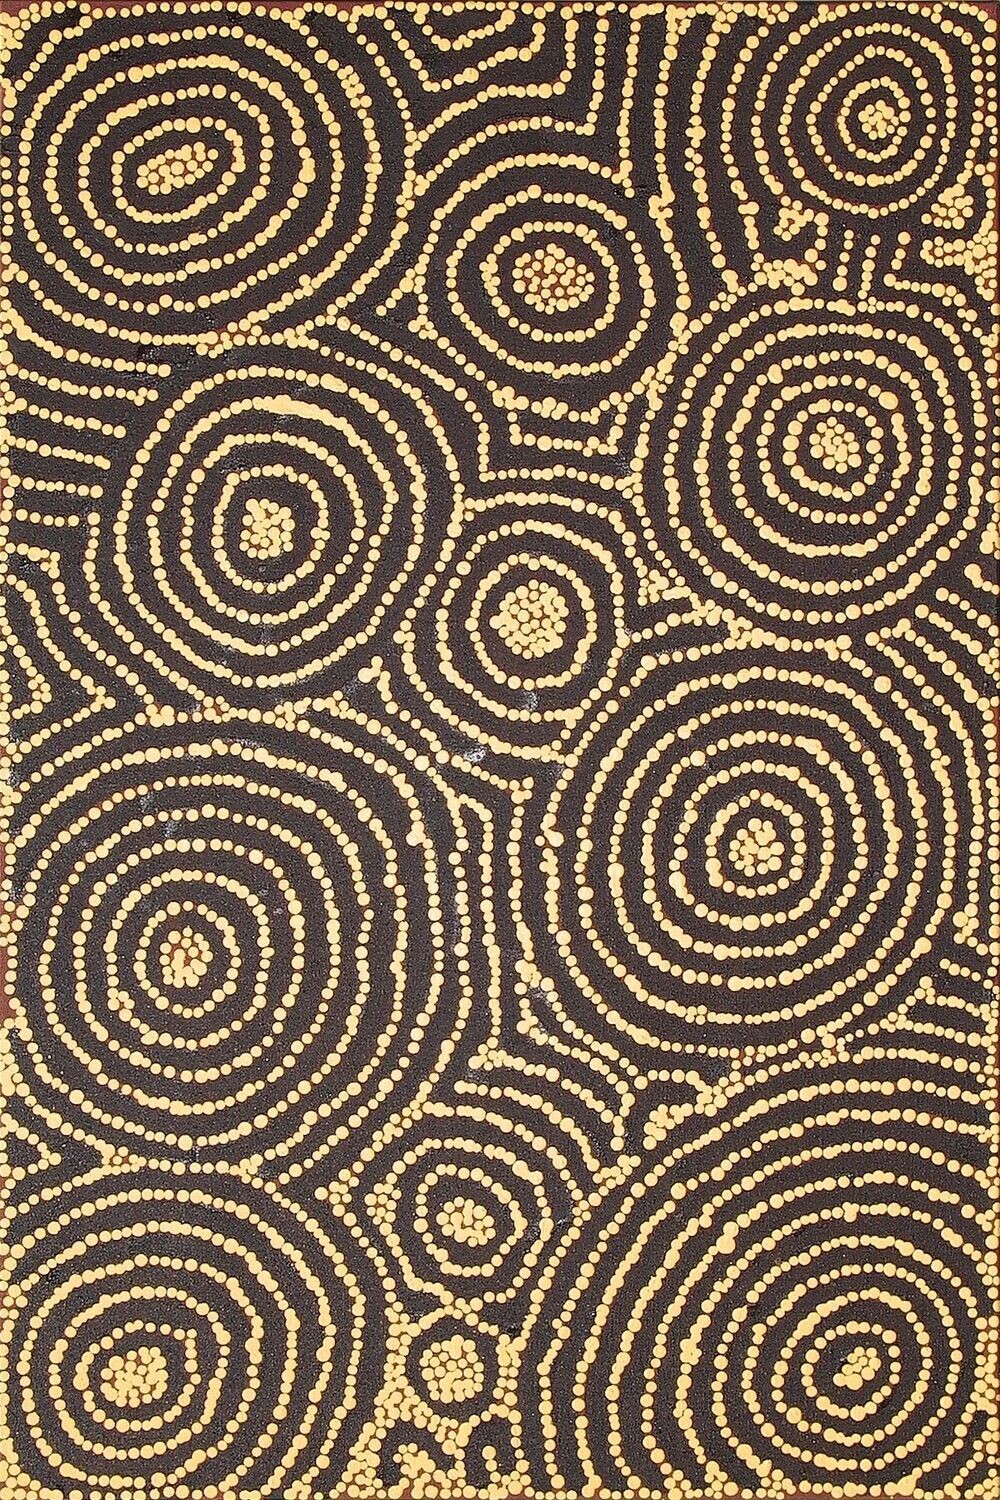 Tingari Cycle, 2005 by Barney Campbell Tjakamarra
91x61cm Cat 9667BC